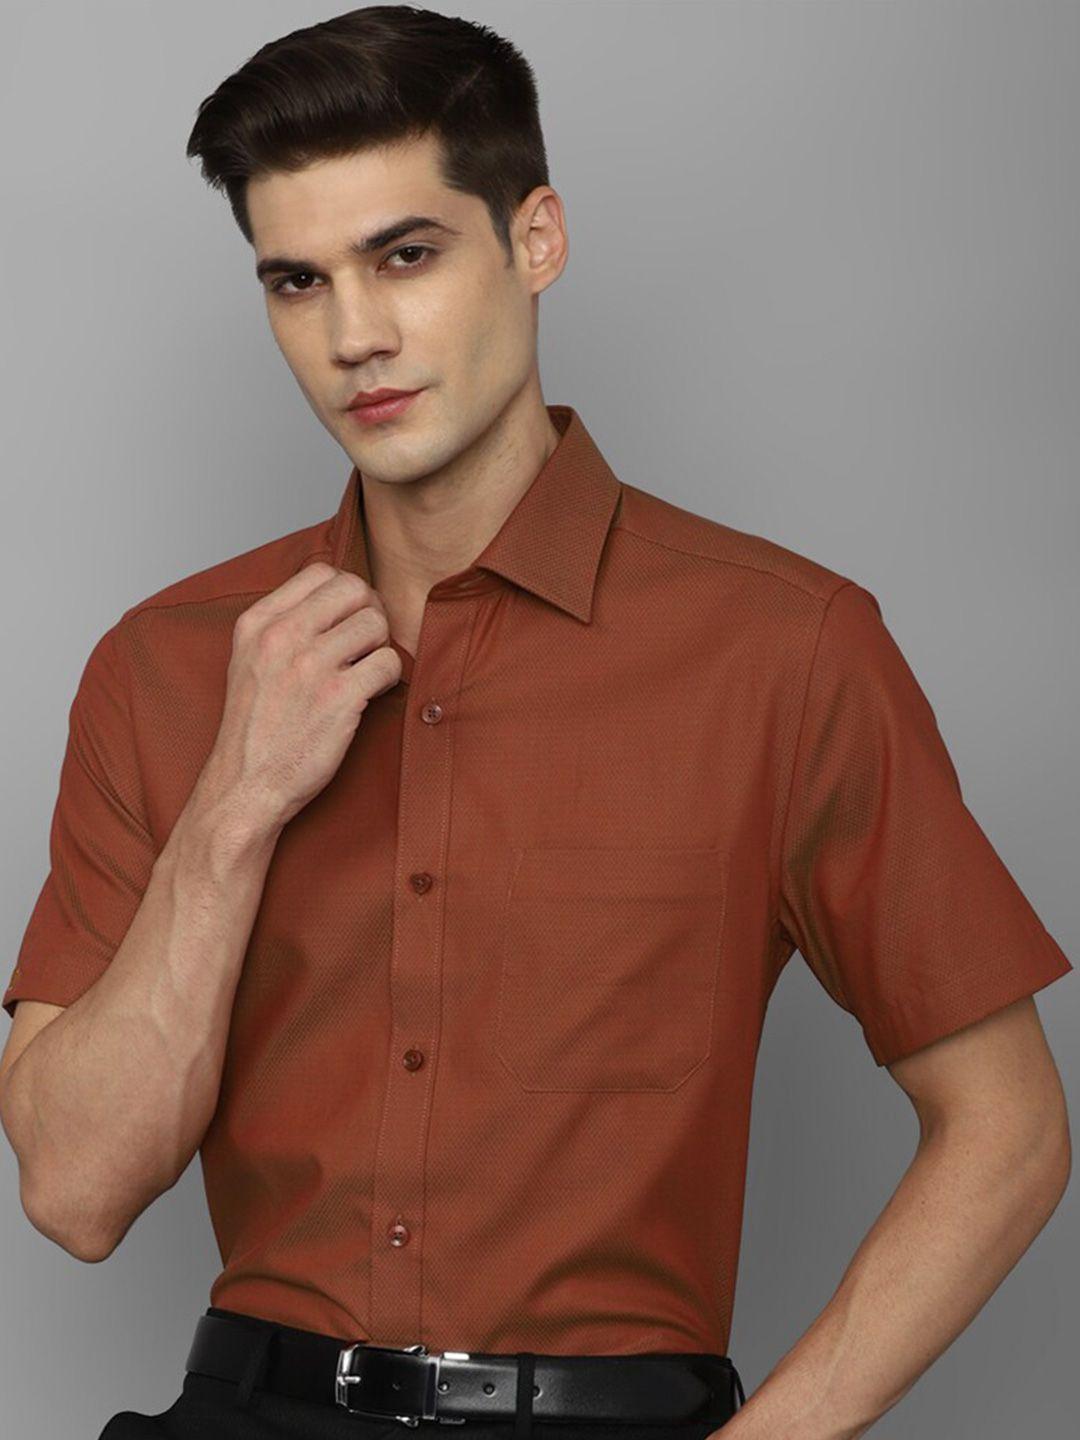 louis-philippe-textured-half-sleeve-slim-fit-pure-cotton-formal-shirt